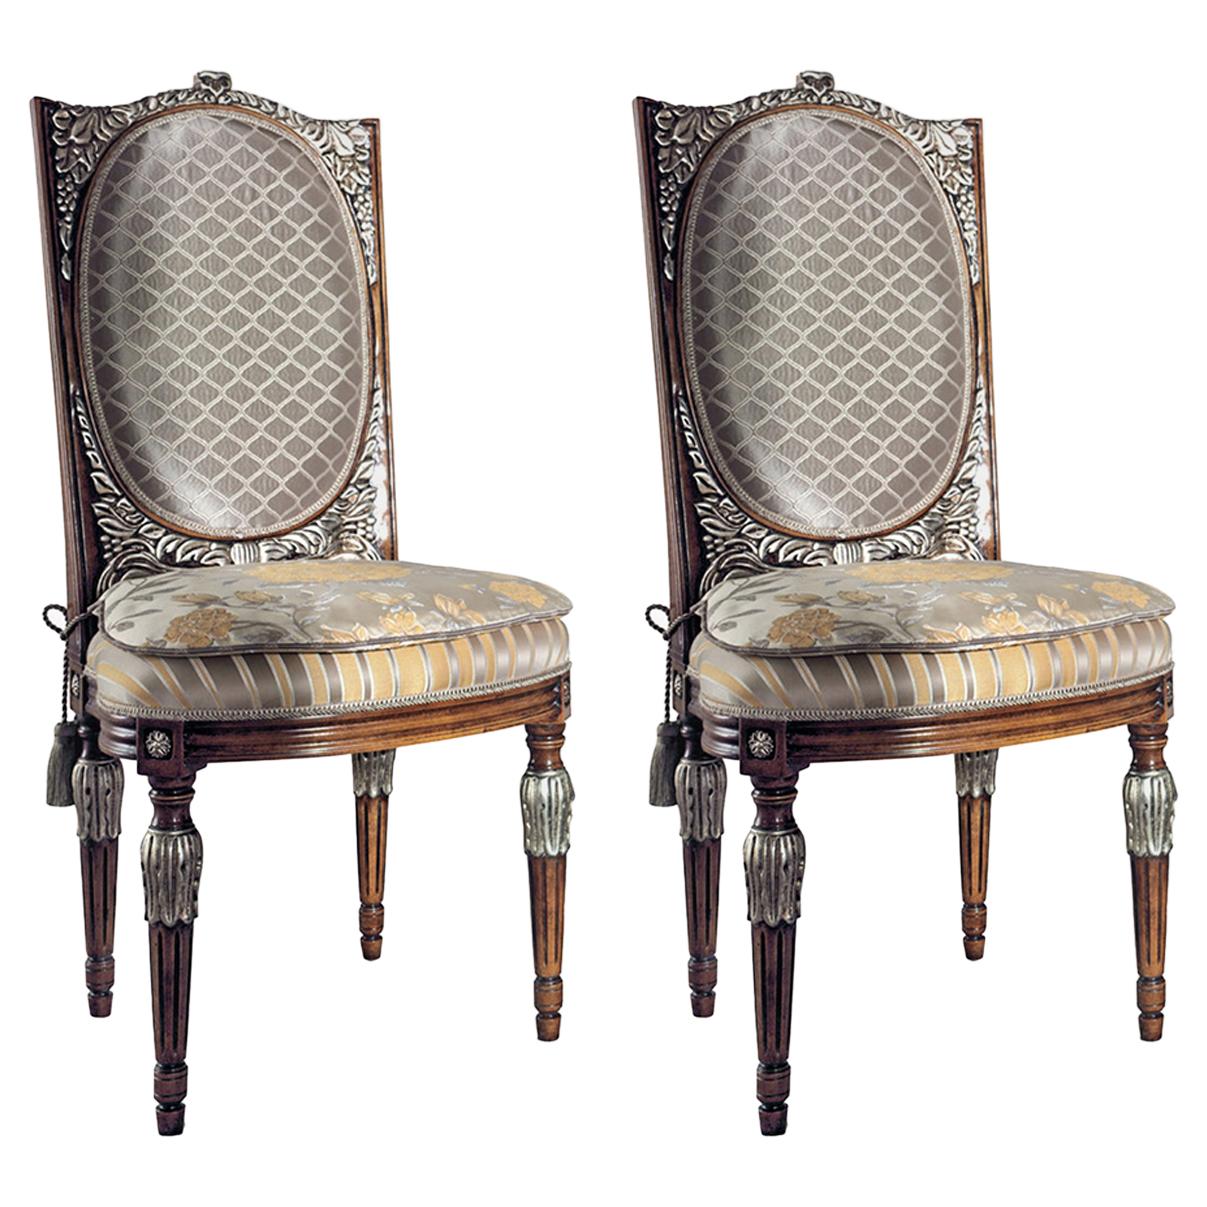 Set of 2 Upholstered Chairs with Silver Inlays